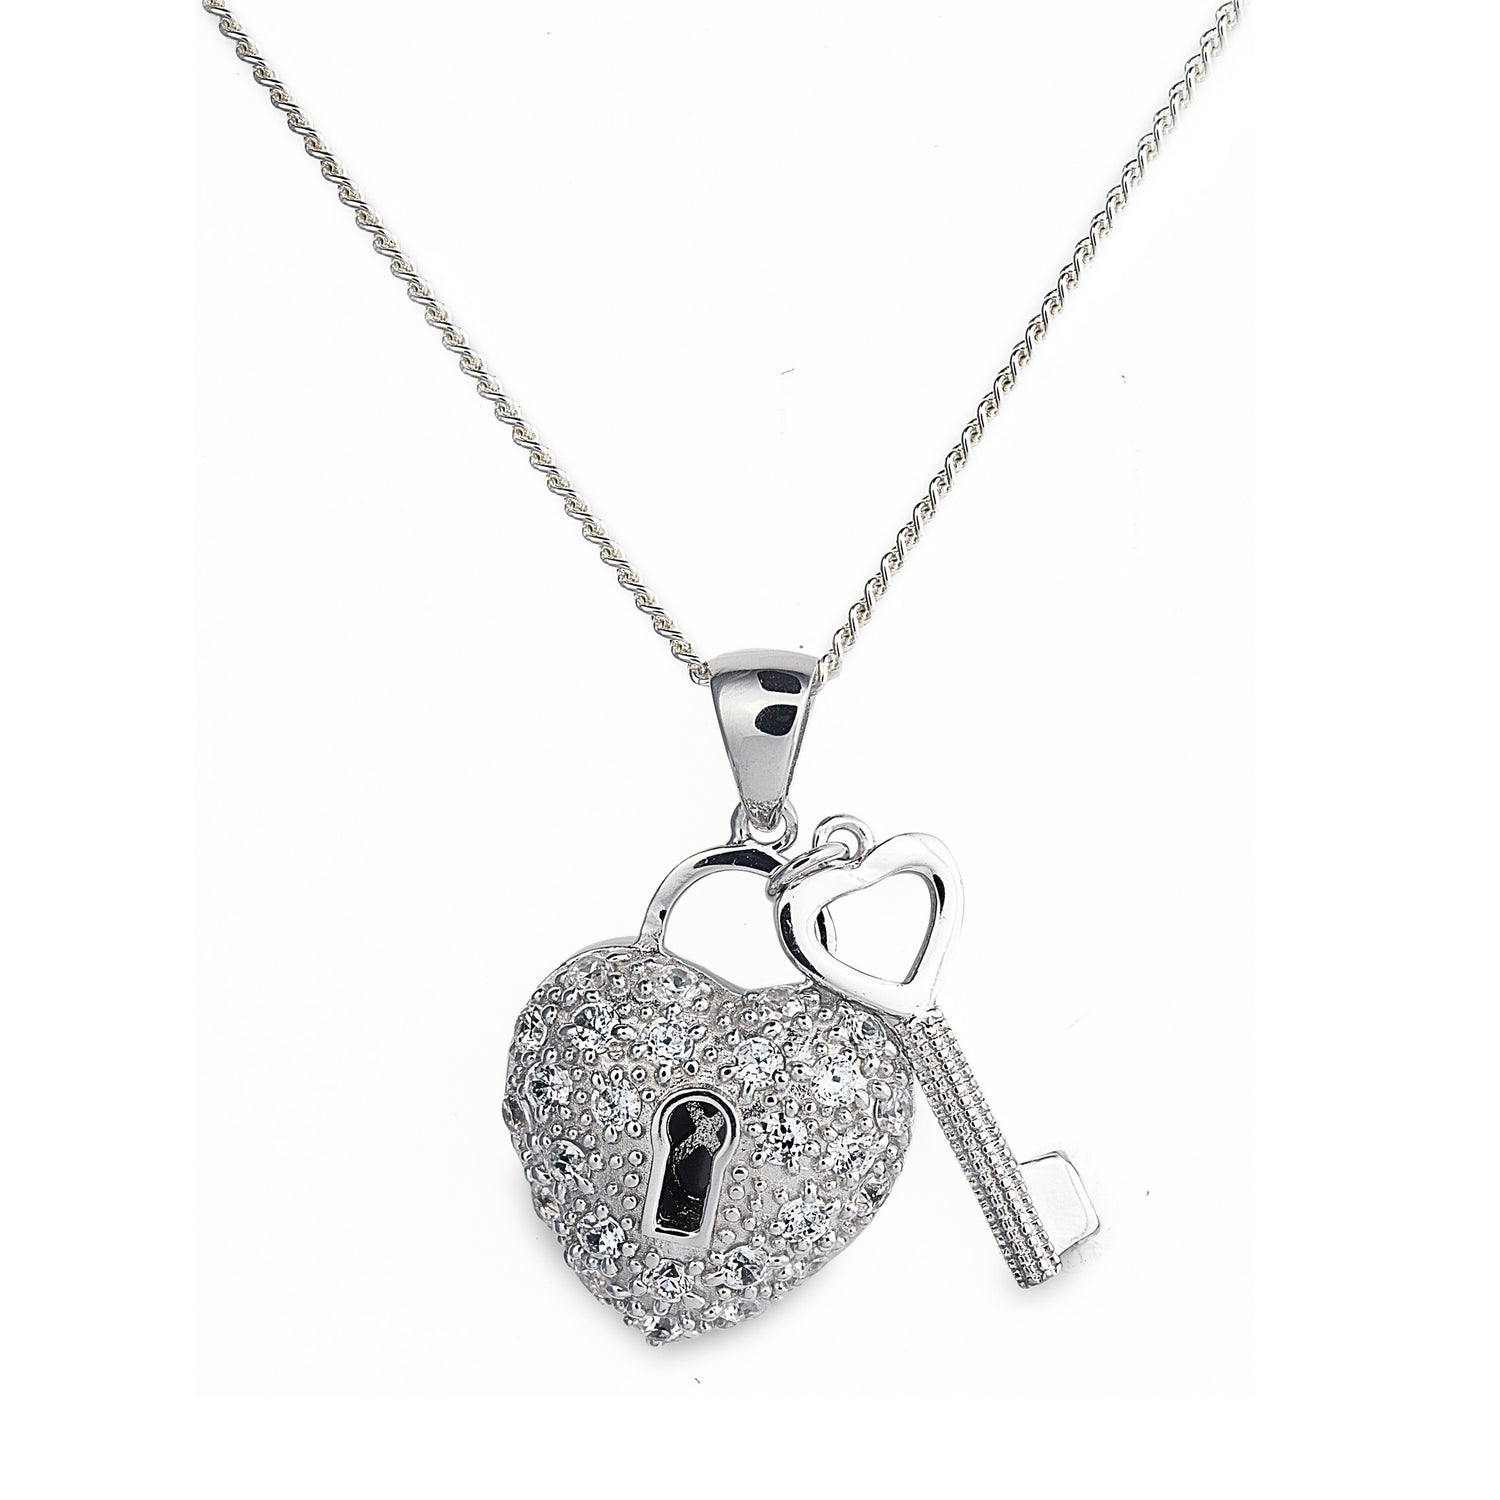 Secret Heart Necklace in 925 sterling silver, heart pendant encrusted with sparkling cubic zirconia stones and key. Worldwide shipping. Affordable luxury jewellery by Bellagio & Co.